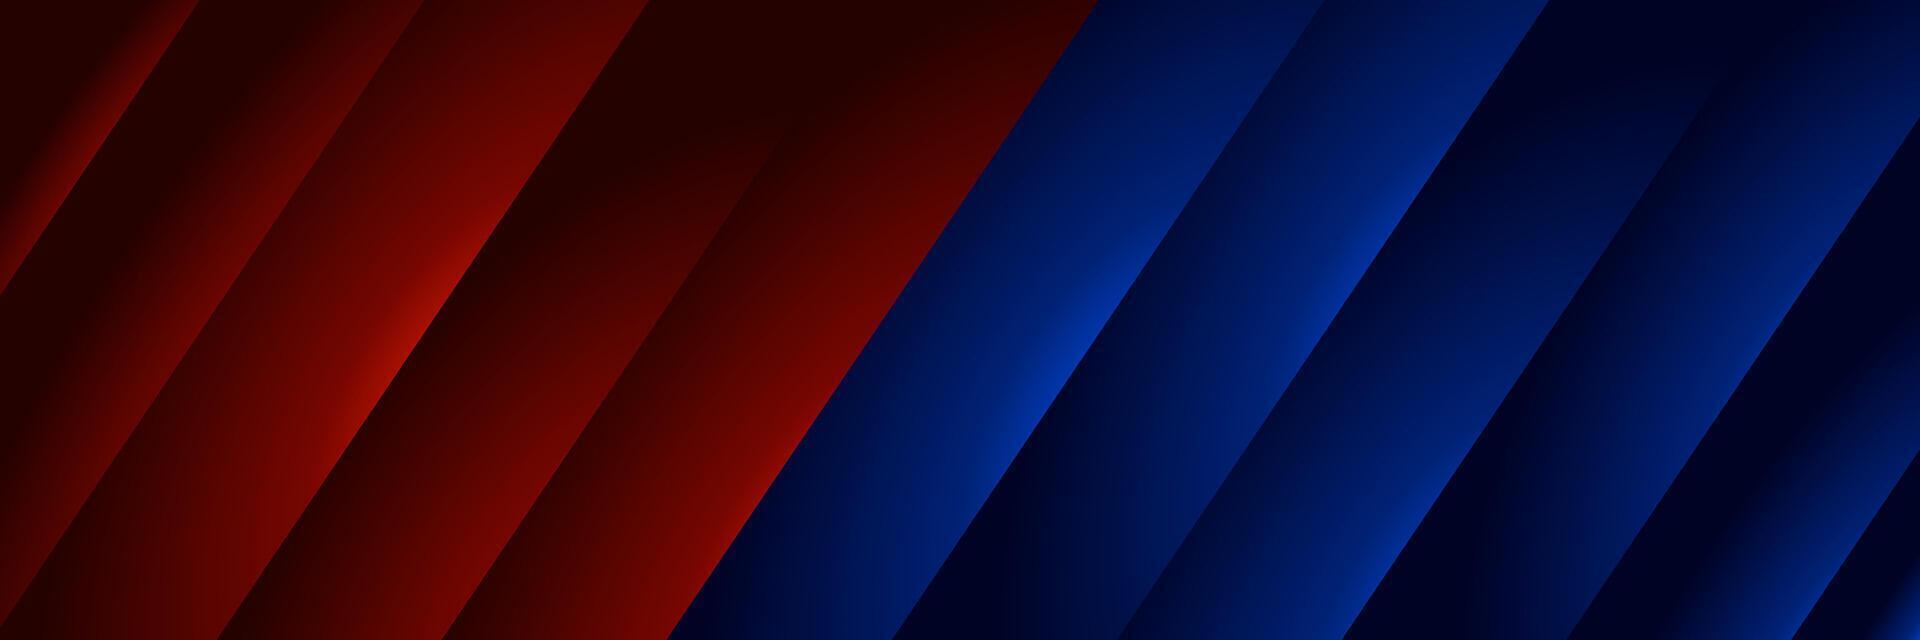 abstract dark red and blue elegant corporate background vector